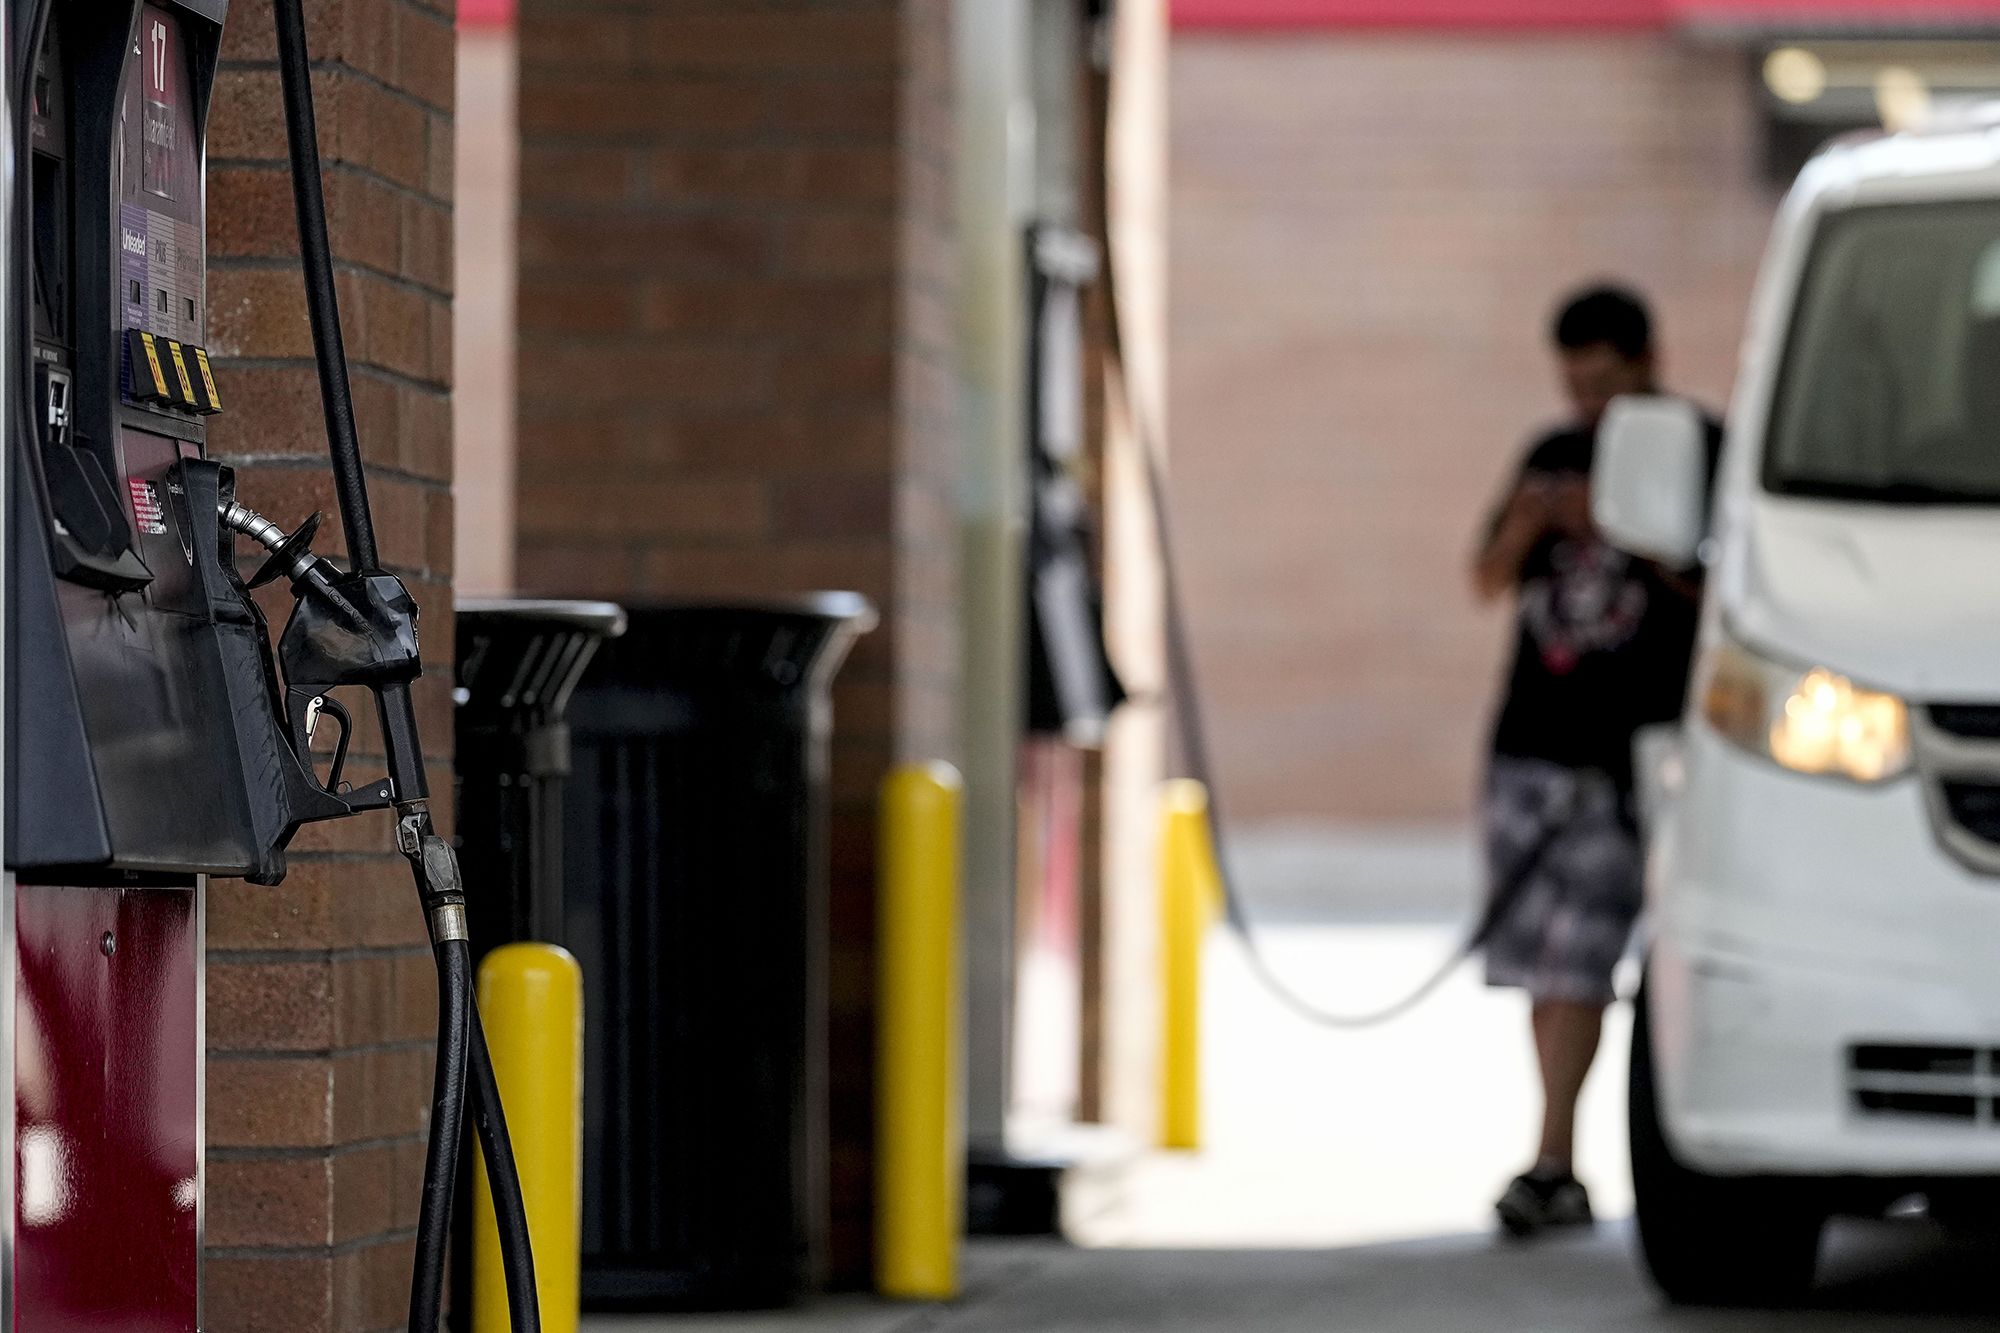 Gas Under $3 Is Becoming the Norm In Much of the US